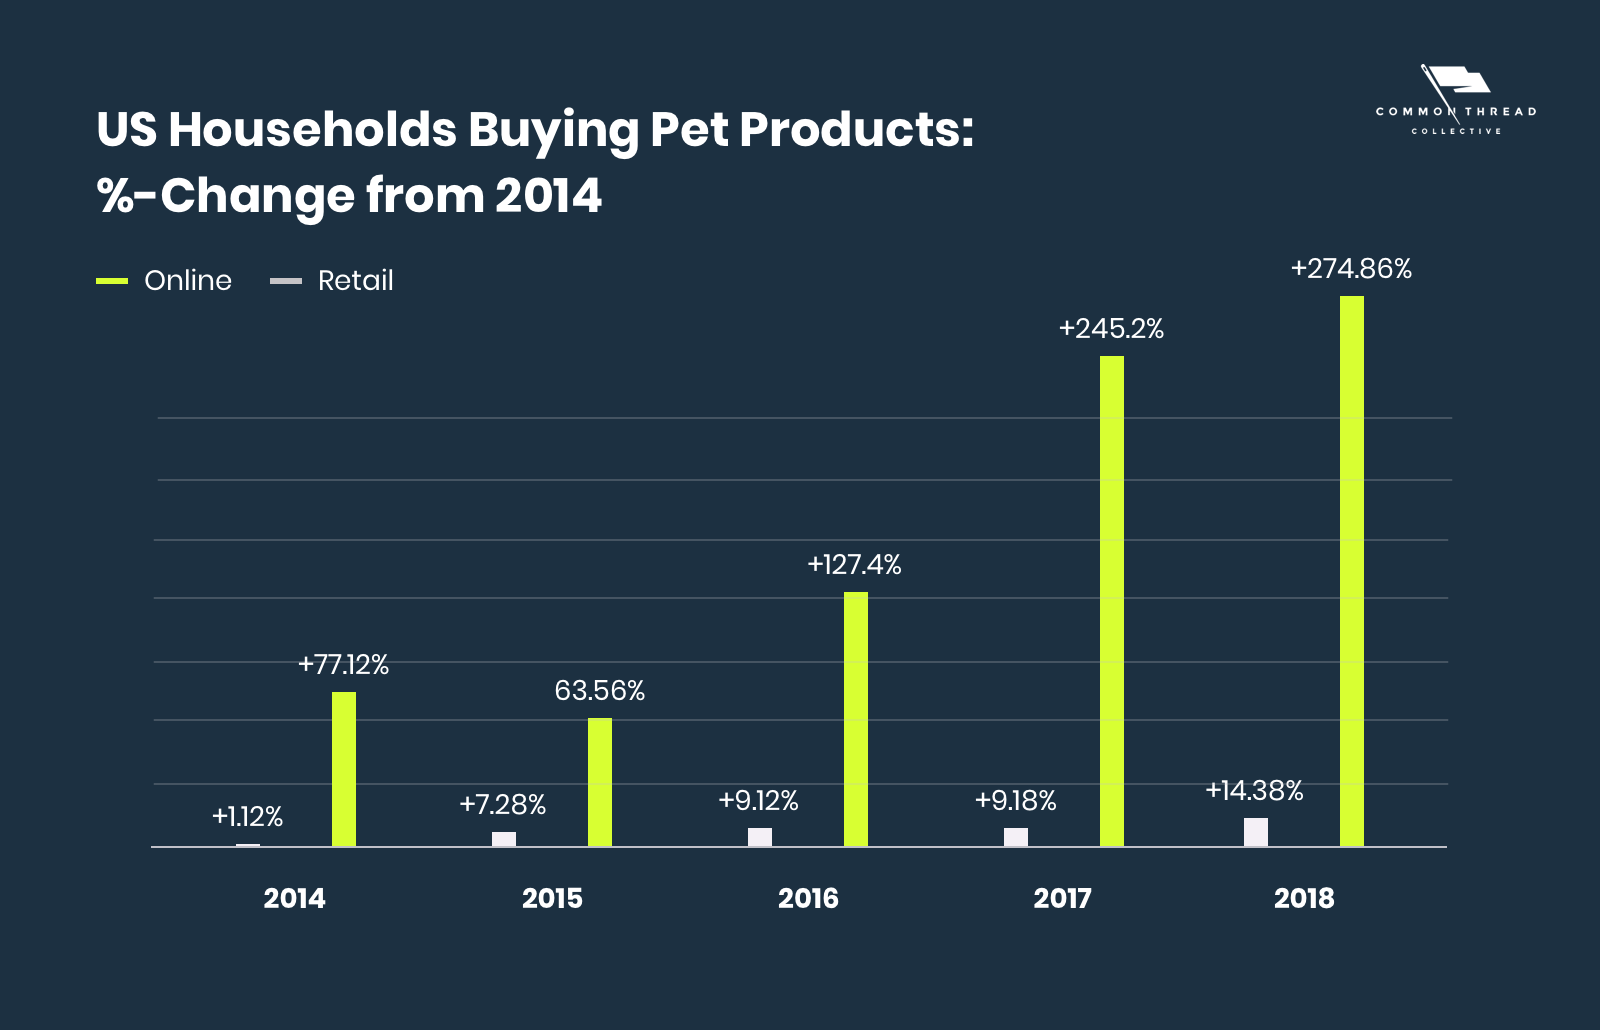 US Households Buying Pet Products % Change from 2014